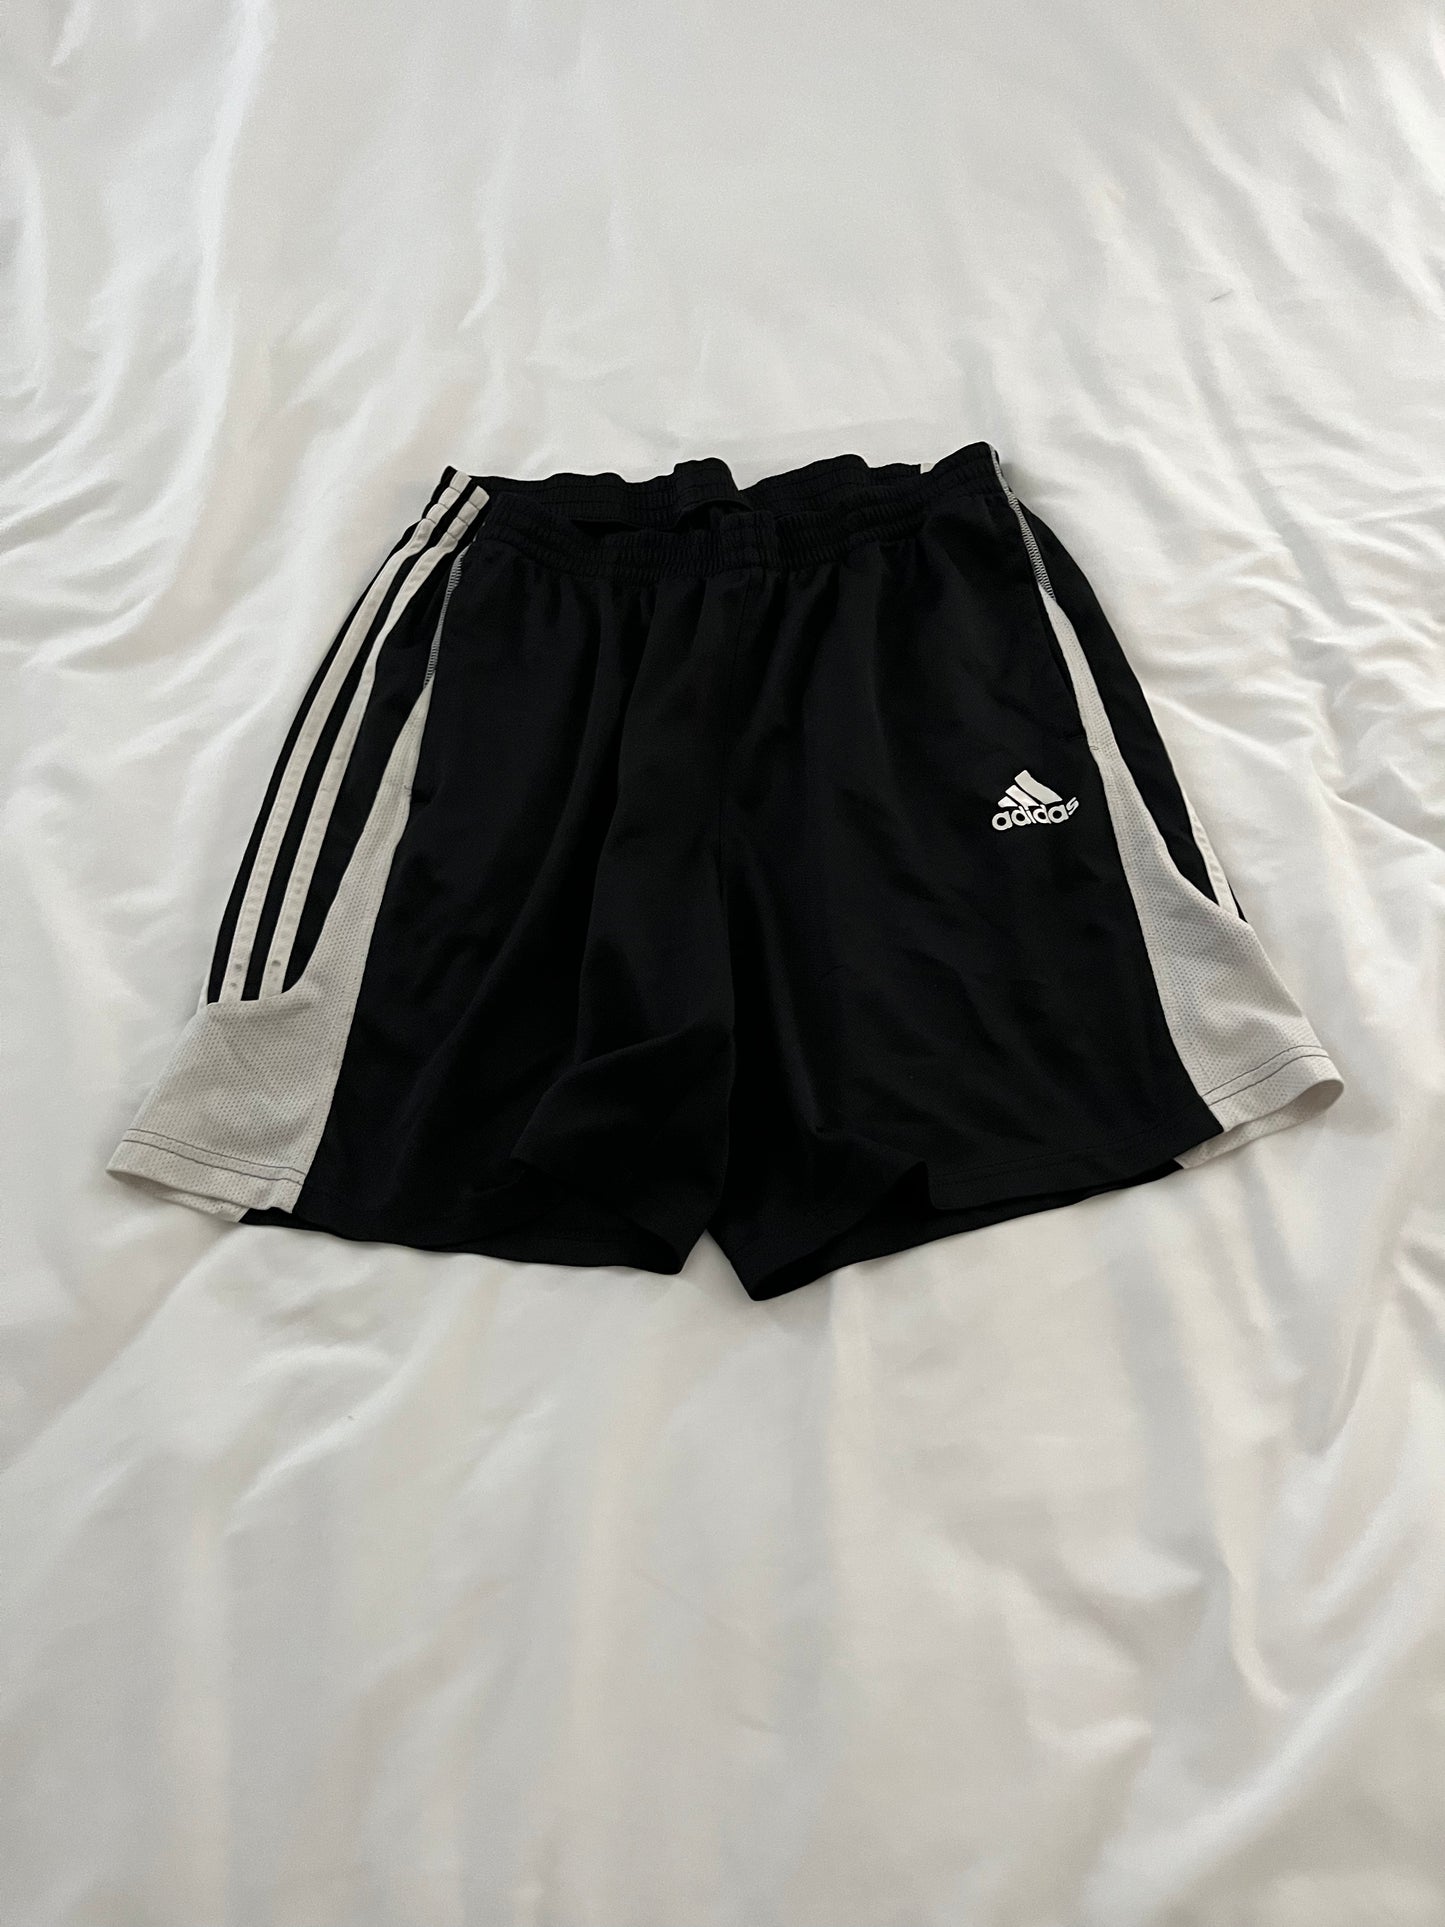 BALLERS: Ricky's ADIDAS Athletic Shorts (M)